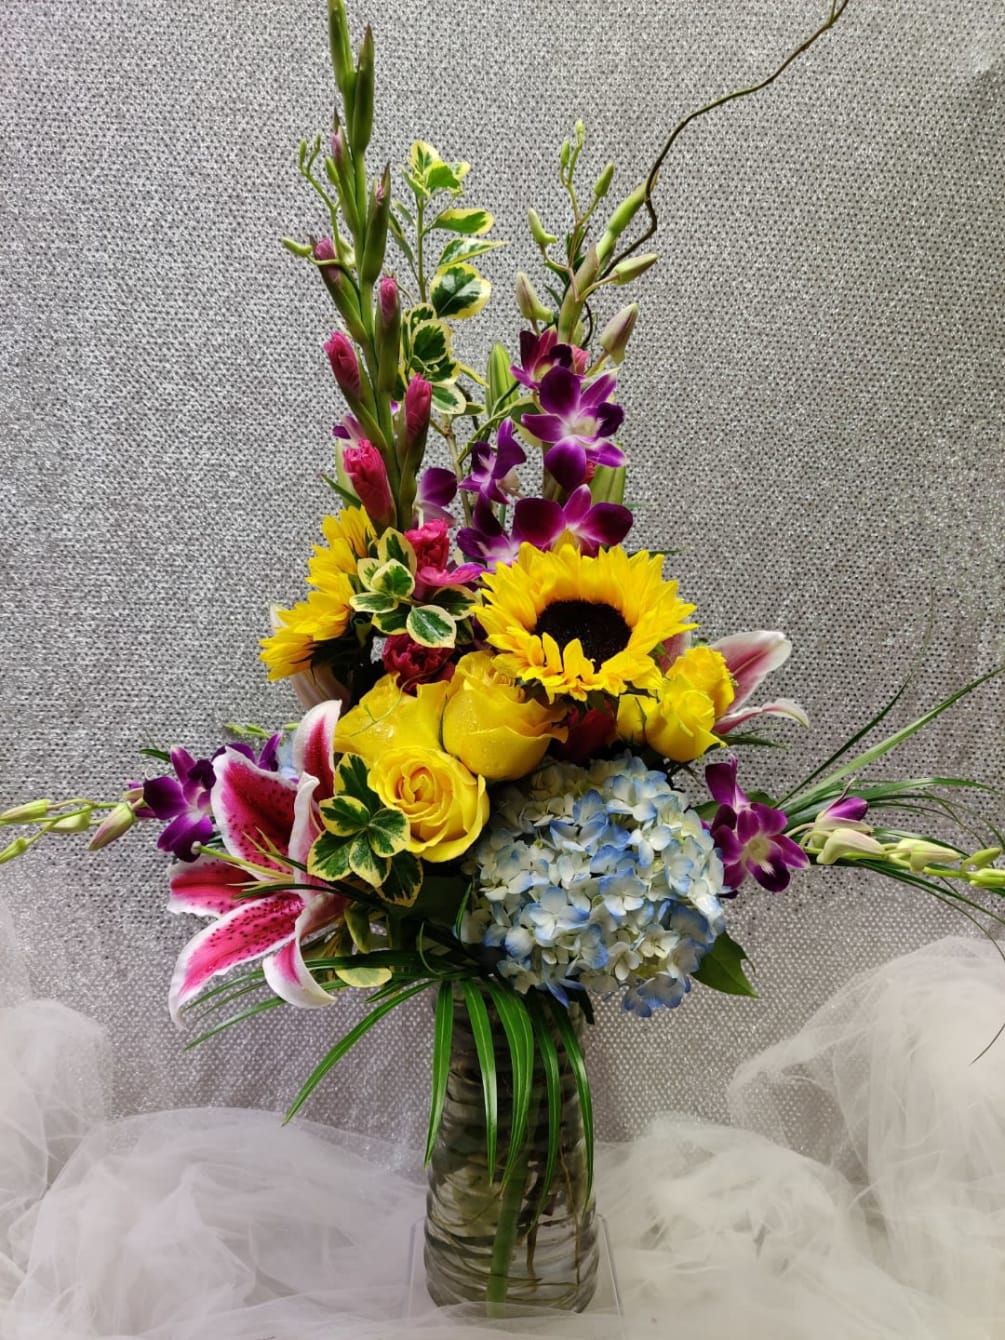 Gladiolus, Orchids, Sunflowers, Hydrangeas, Stargazer Lily, Roses, Willow, and Variegated greenery